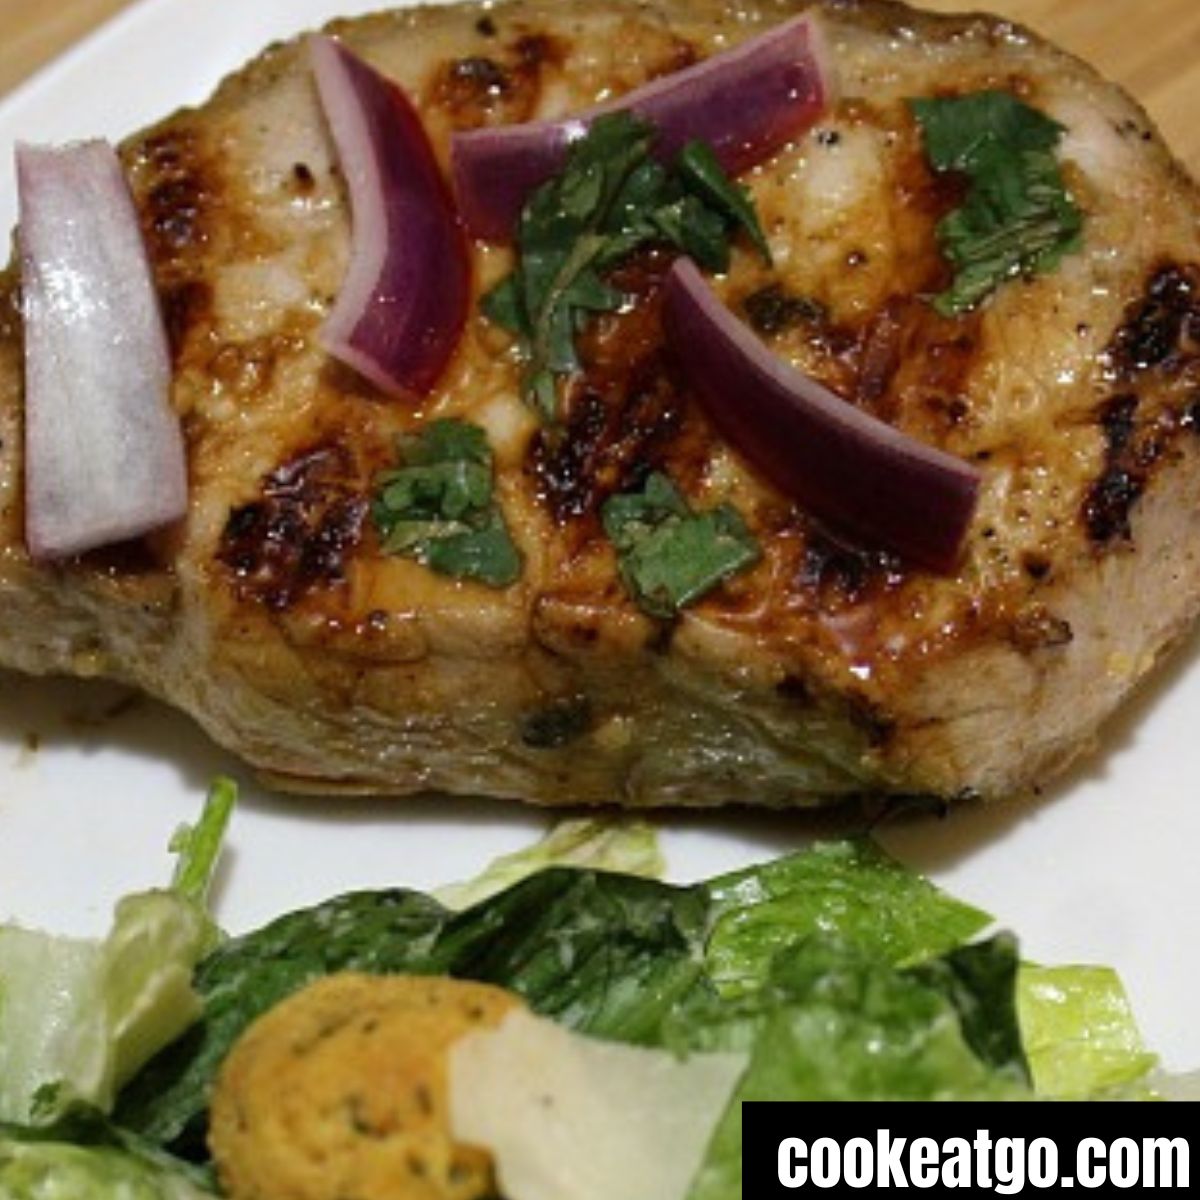 Grilled Weight Watchers Pork Chops Served With Salad